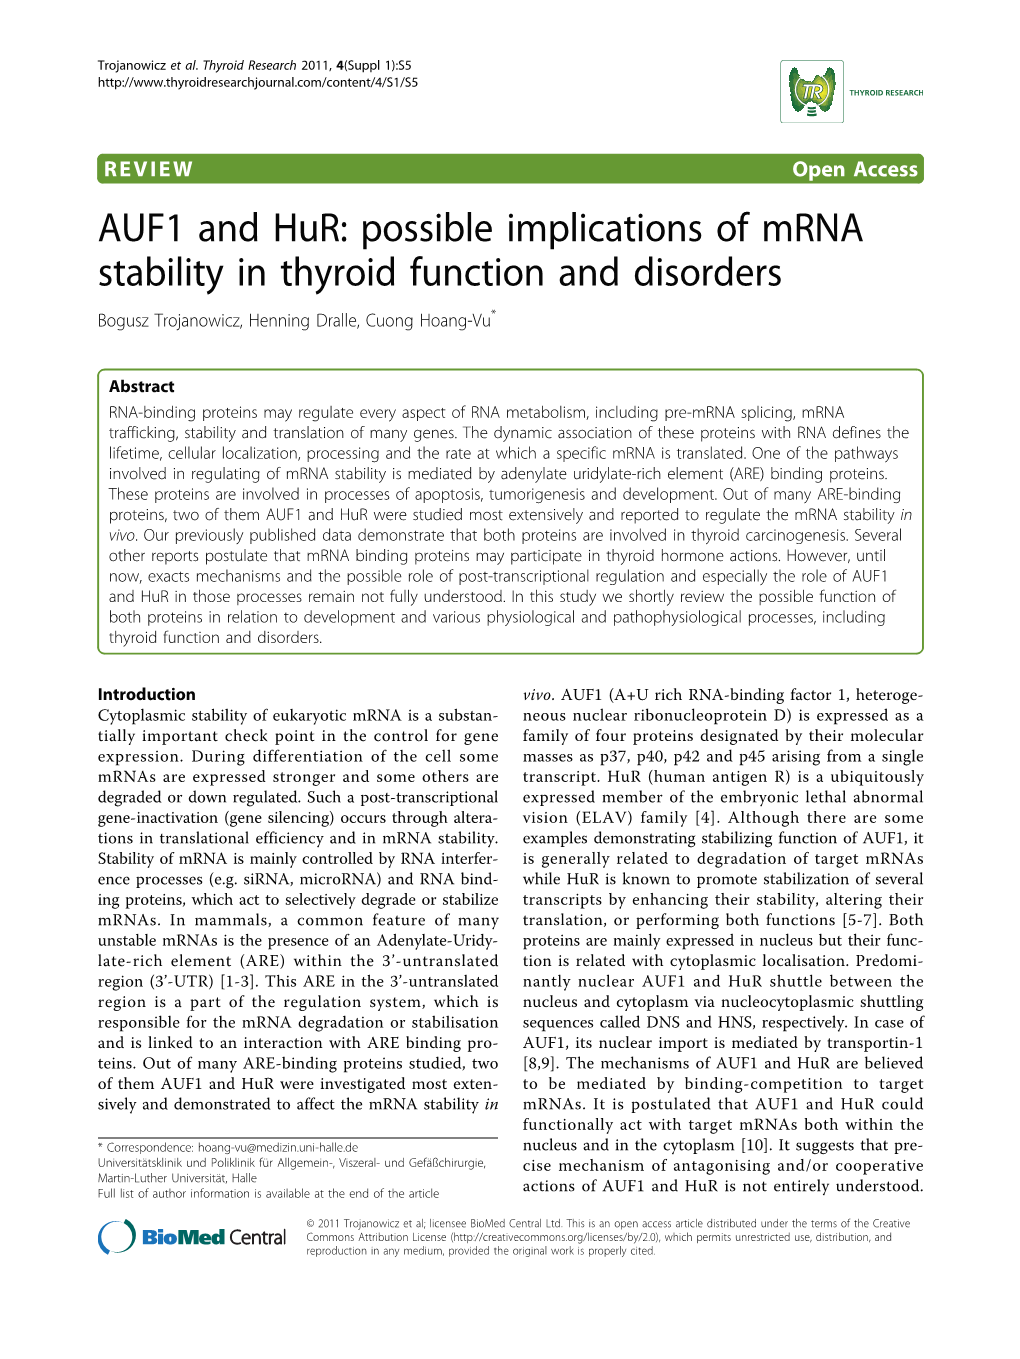 AUF1 and Hur: Possible Implications of Mrna Stability in Thyroid Function and Disorders Bogusz Trojanowicz, Henning Dralle, Cuong Hoang-Vu*